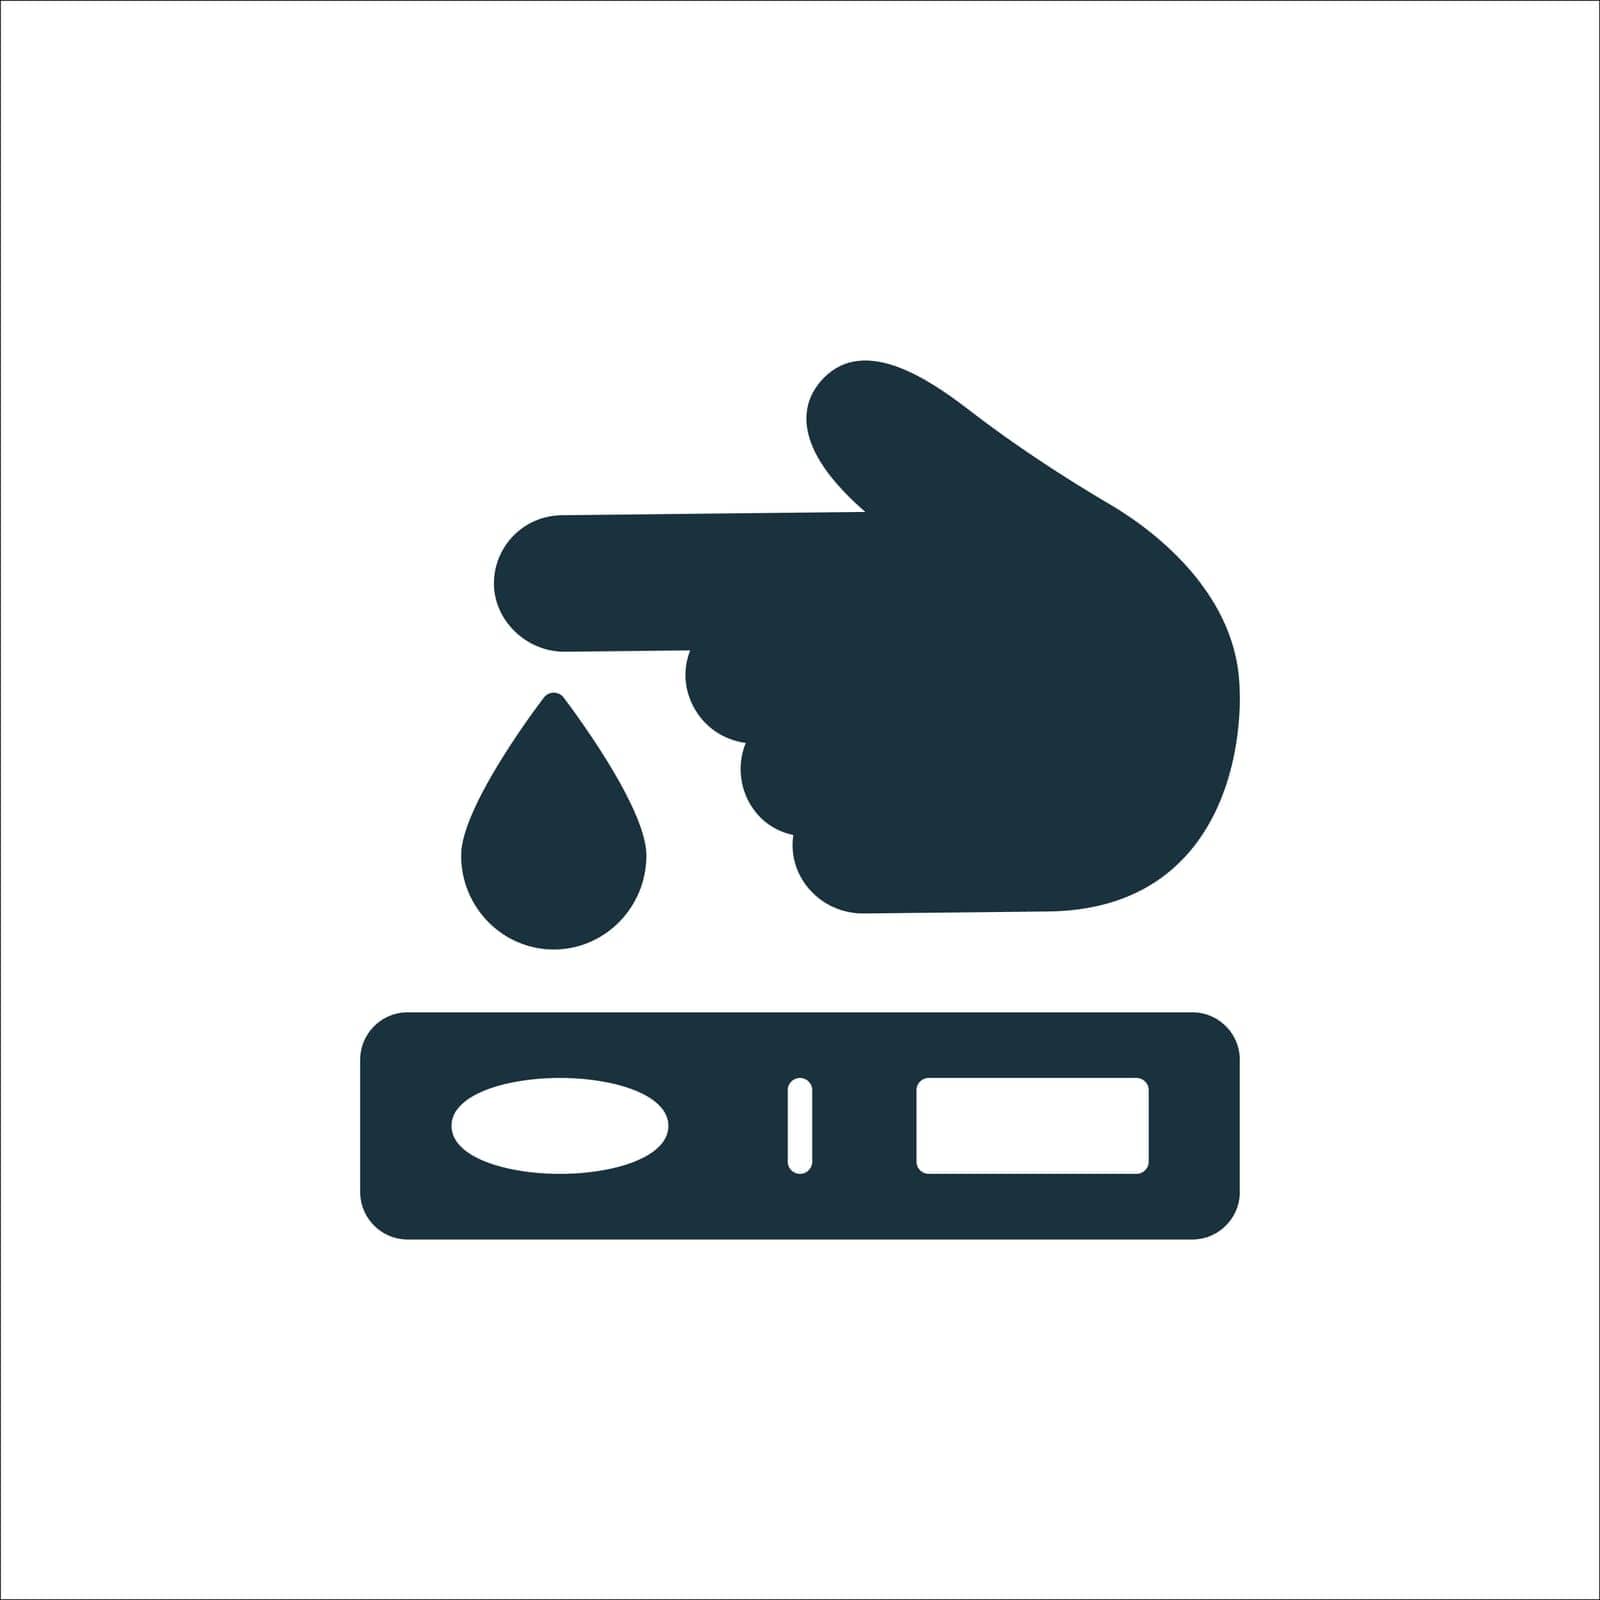 Finger Blood Test Silhouette Icon. Blood Sugar Analysis Pictogram. Research of Level Glucose Glyph Icon. Tests of Glycemia in Diabetes. Isolated Vector Illustration by Toxa2x2